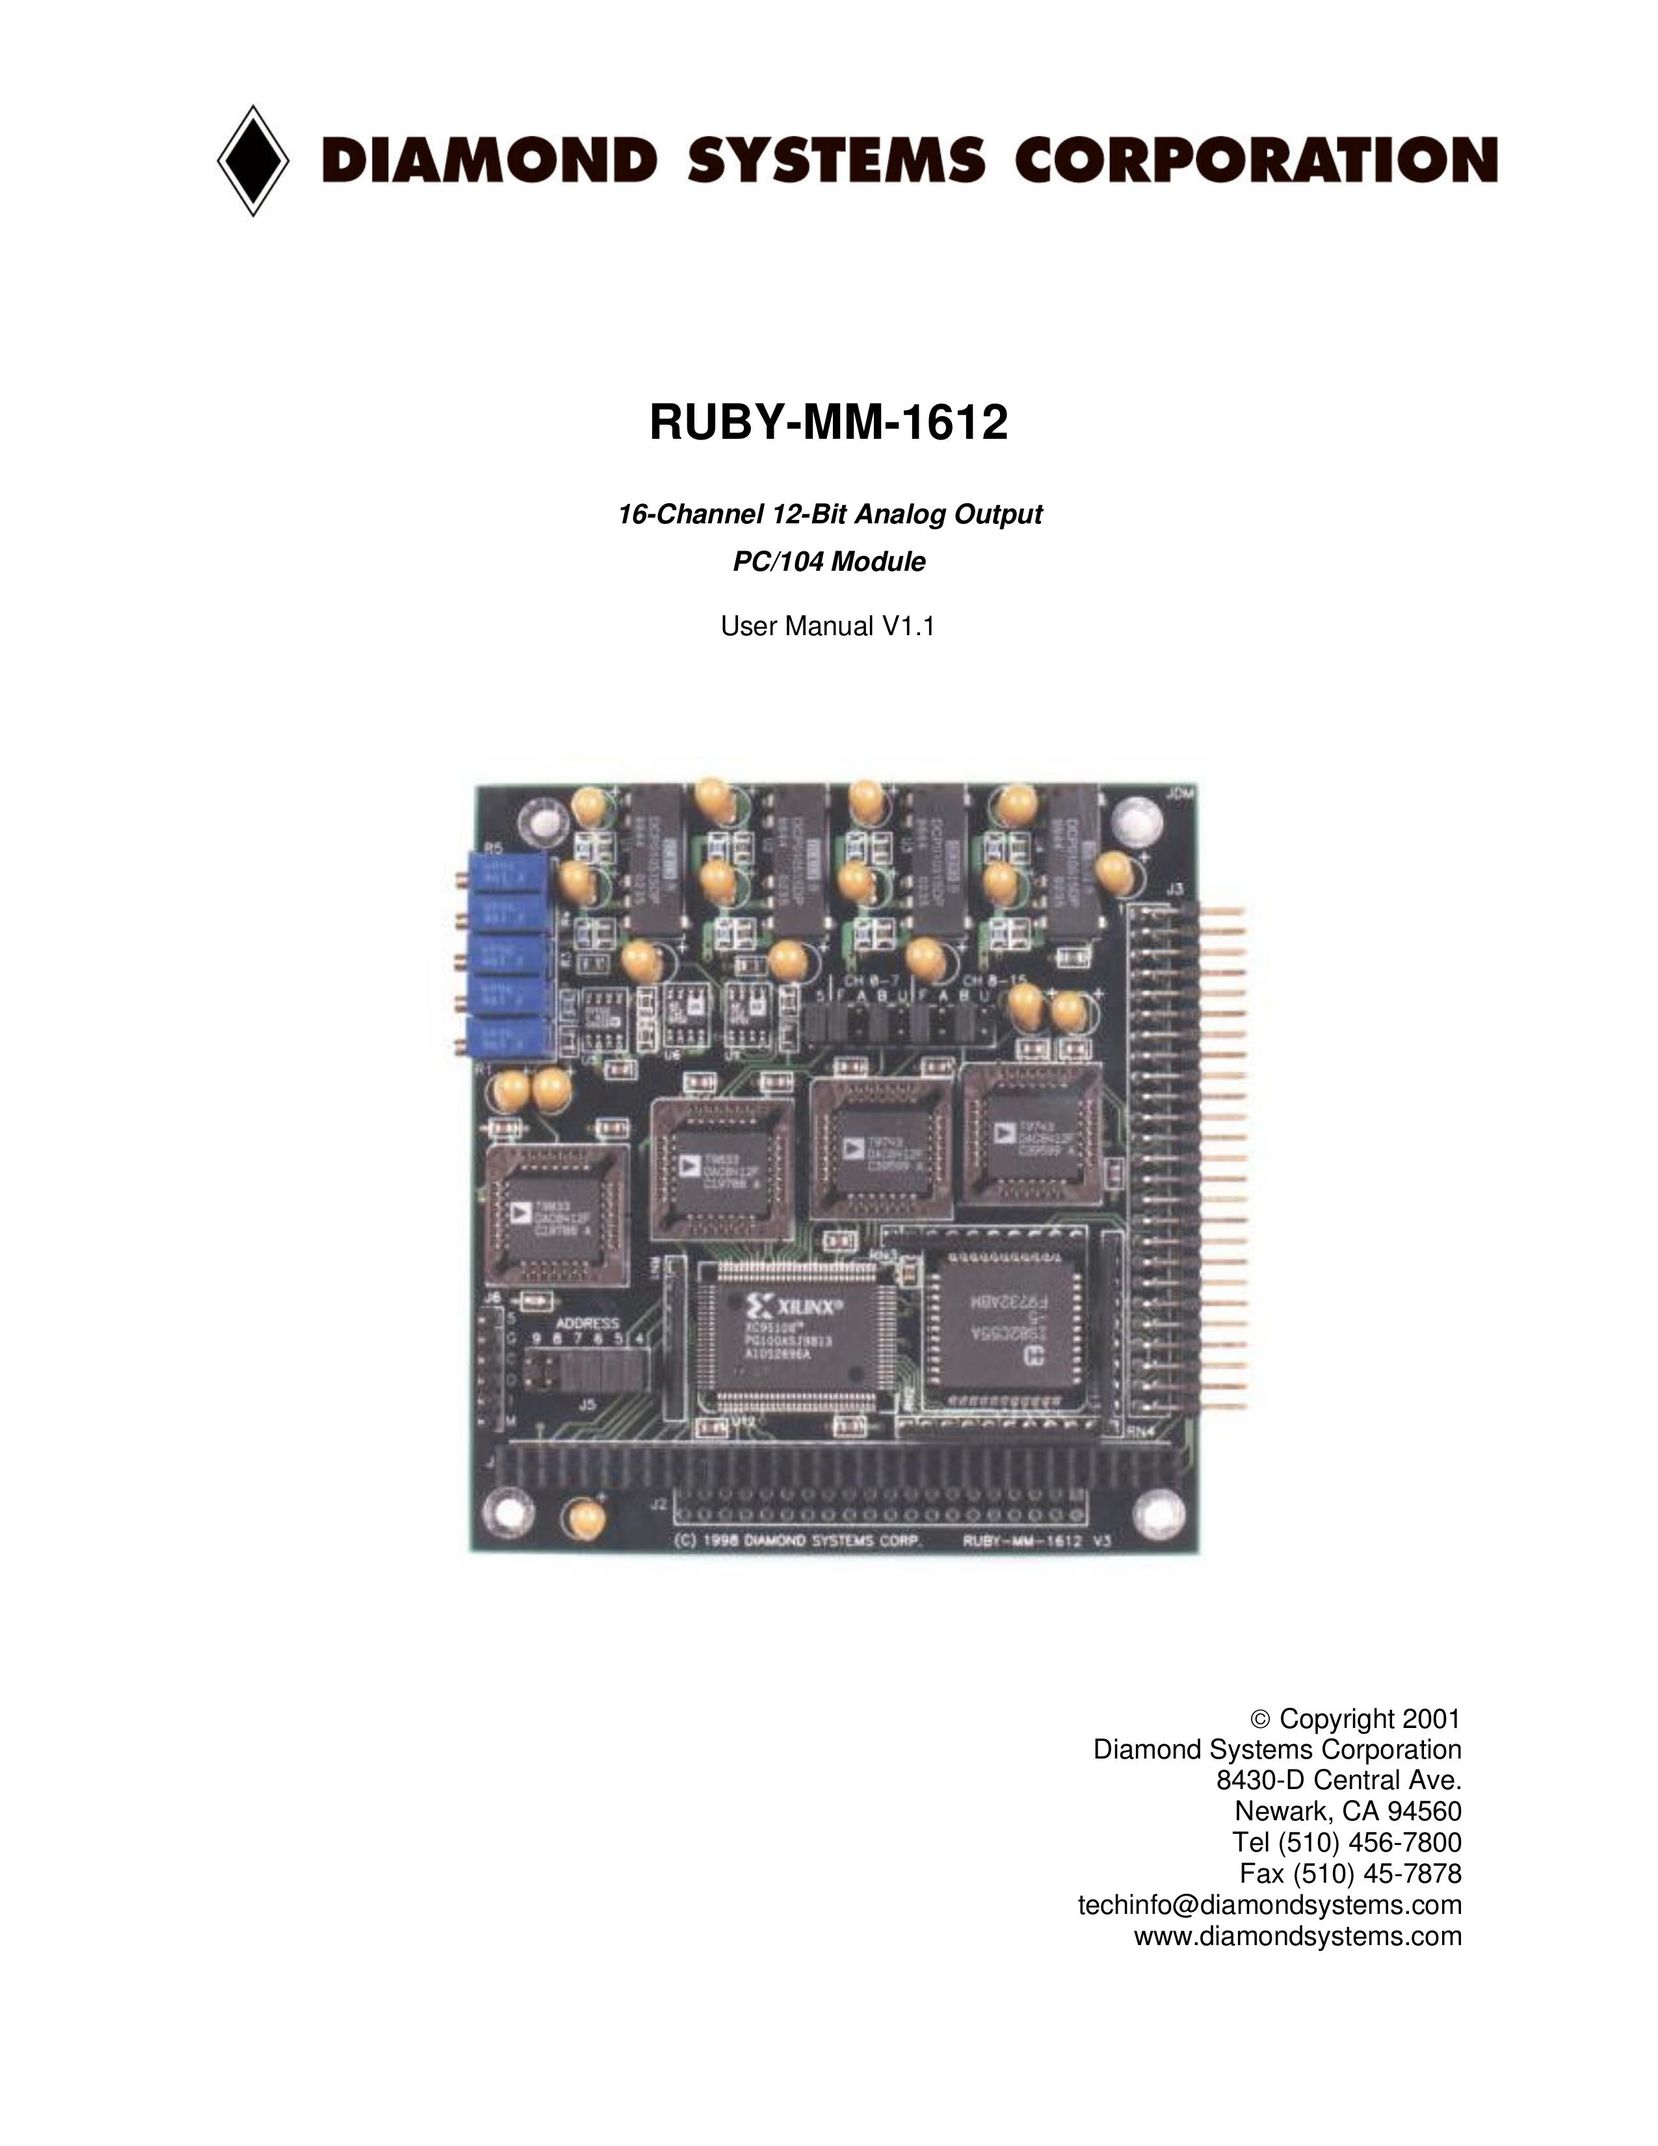 Diamond Systems RUBY-MM-1612 Computer Hardware User Manual